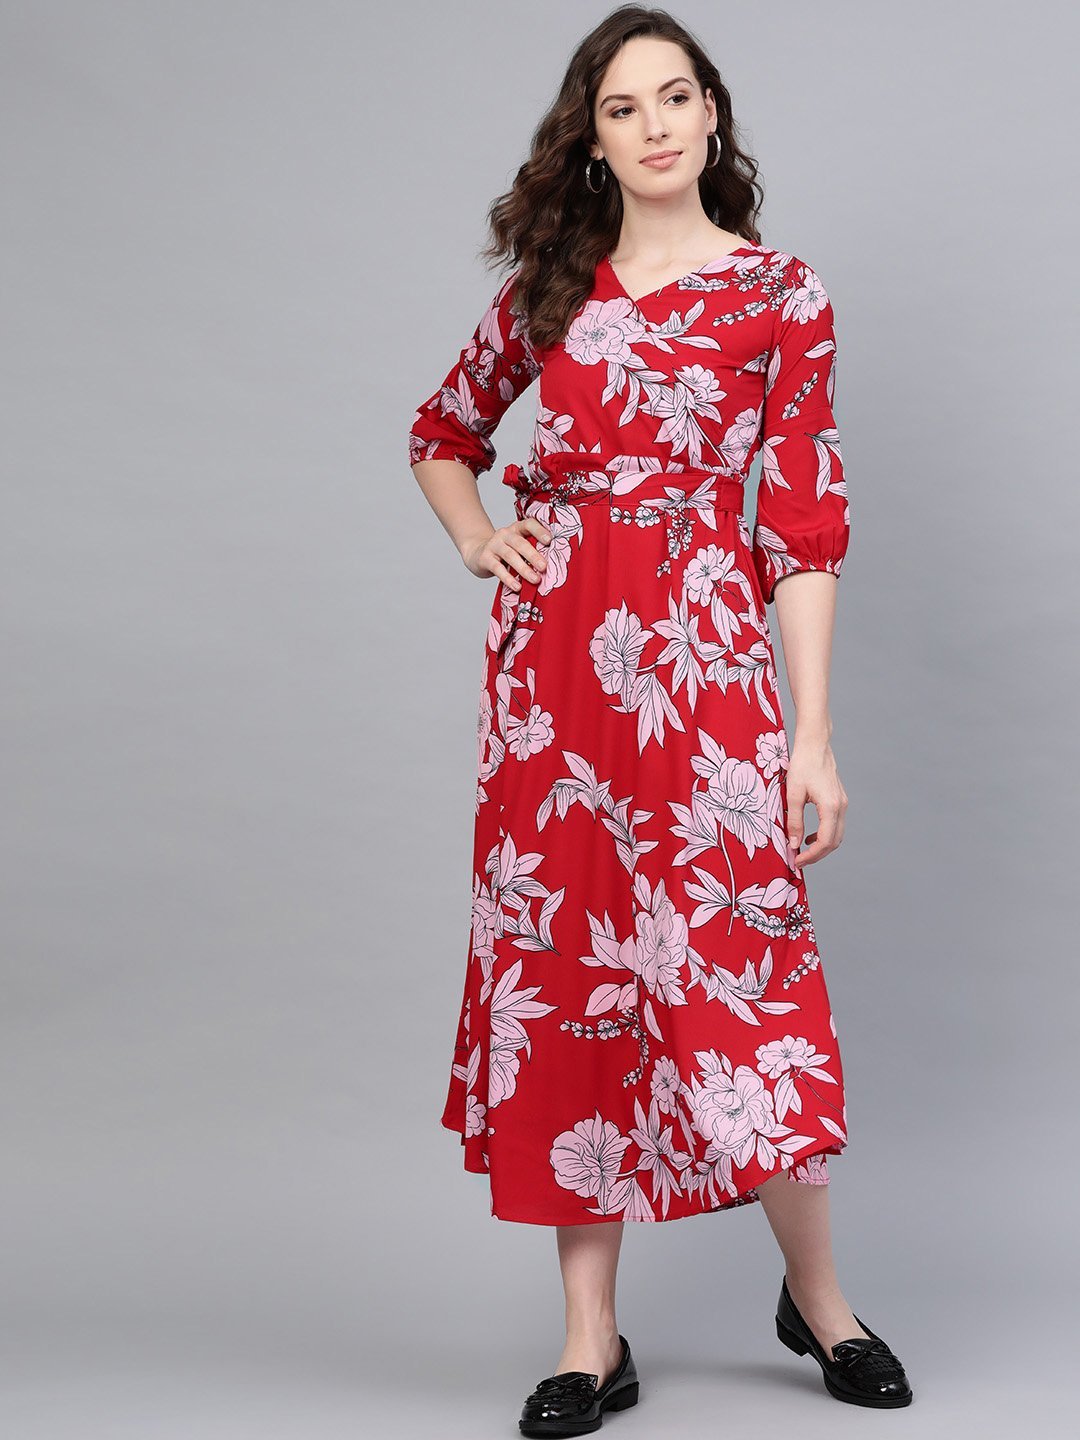 Women's Red Printed V Neck Casual Cute Party Dress - Stilento